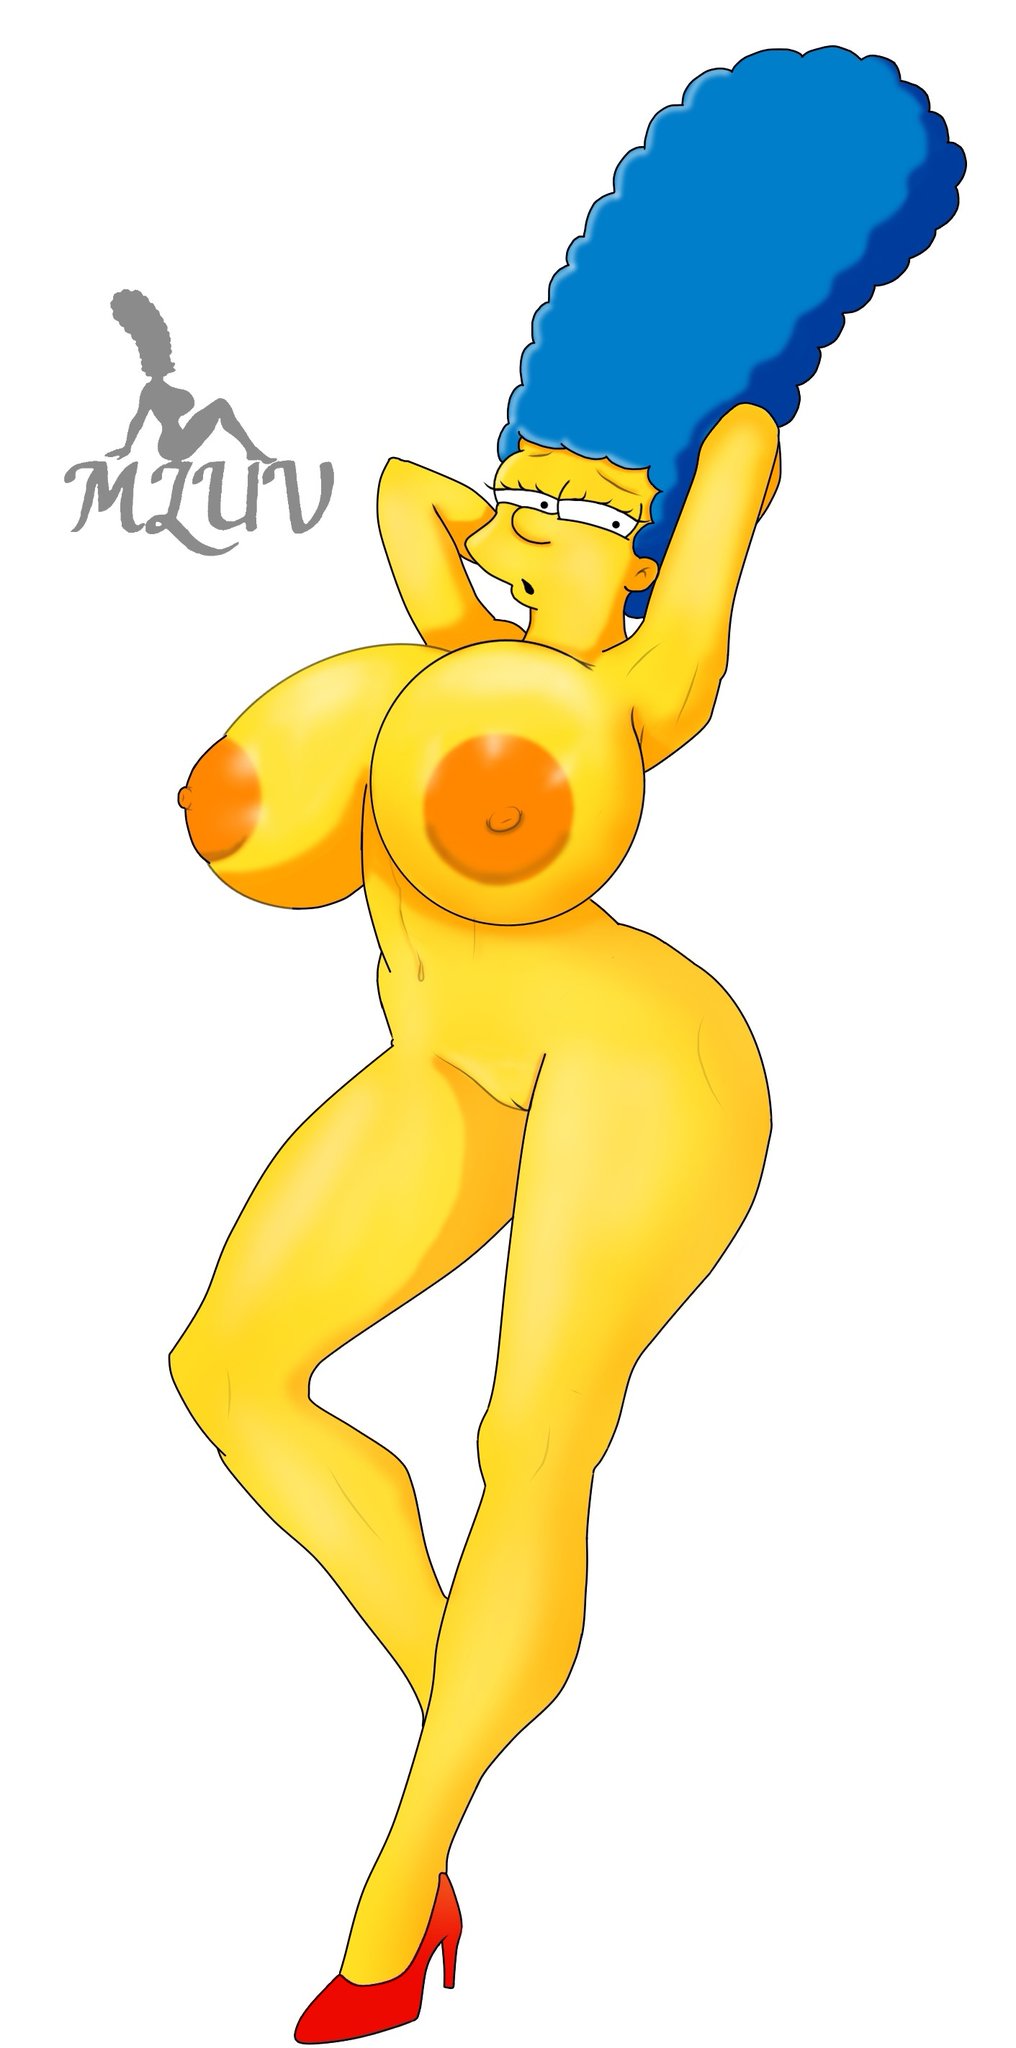 Simpsons Toon Porn - Marge Simpson from The Simpsons Cartoon Porn Porn Pic - EPORNER